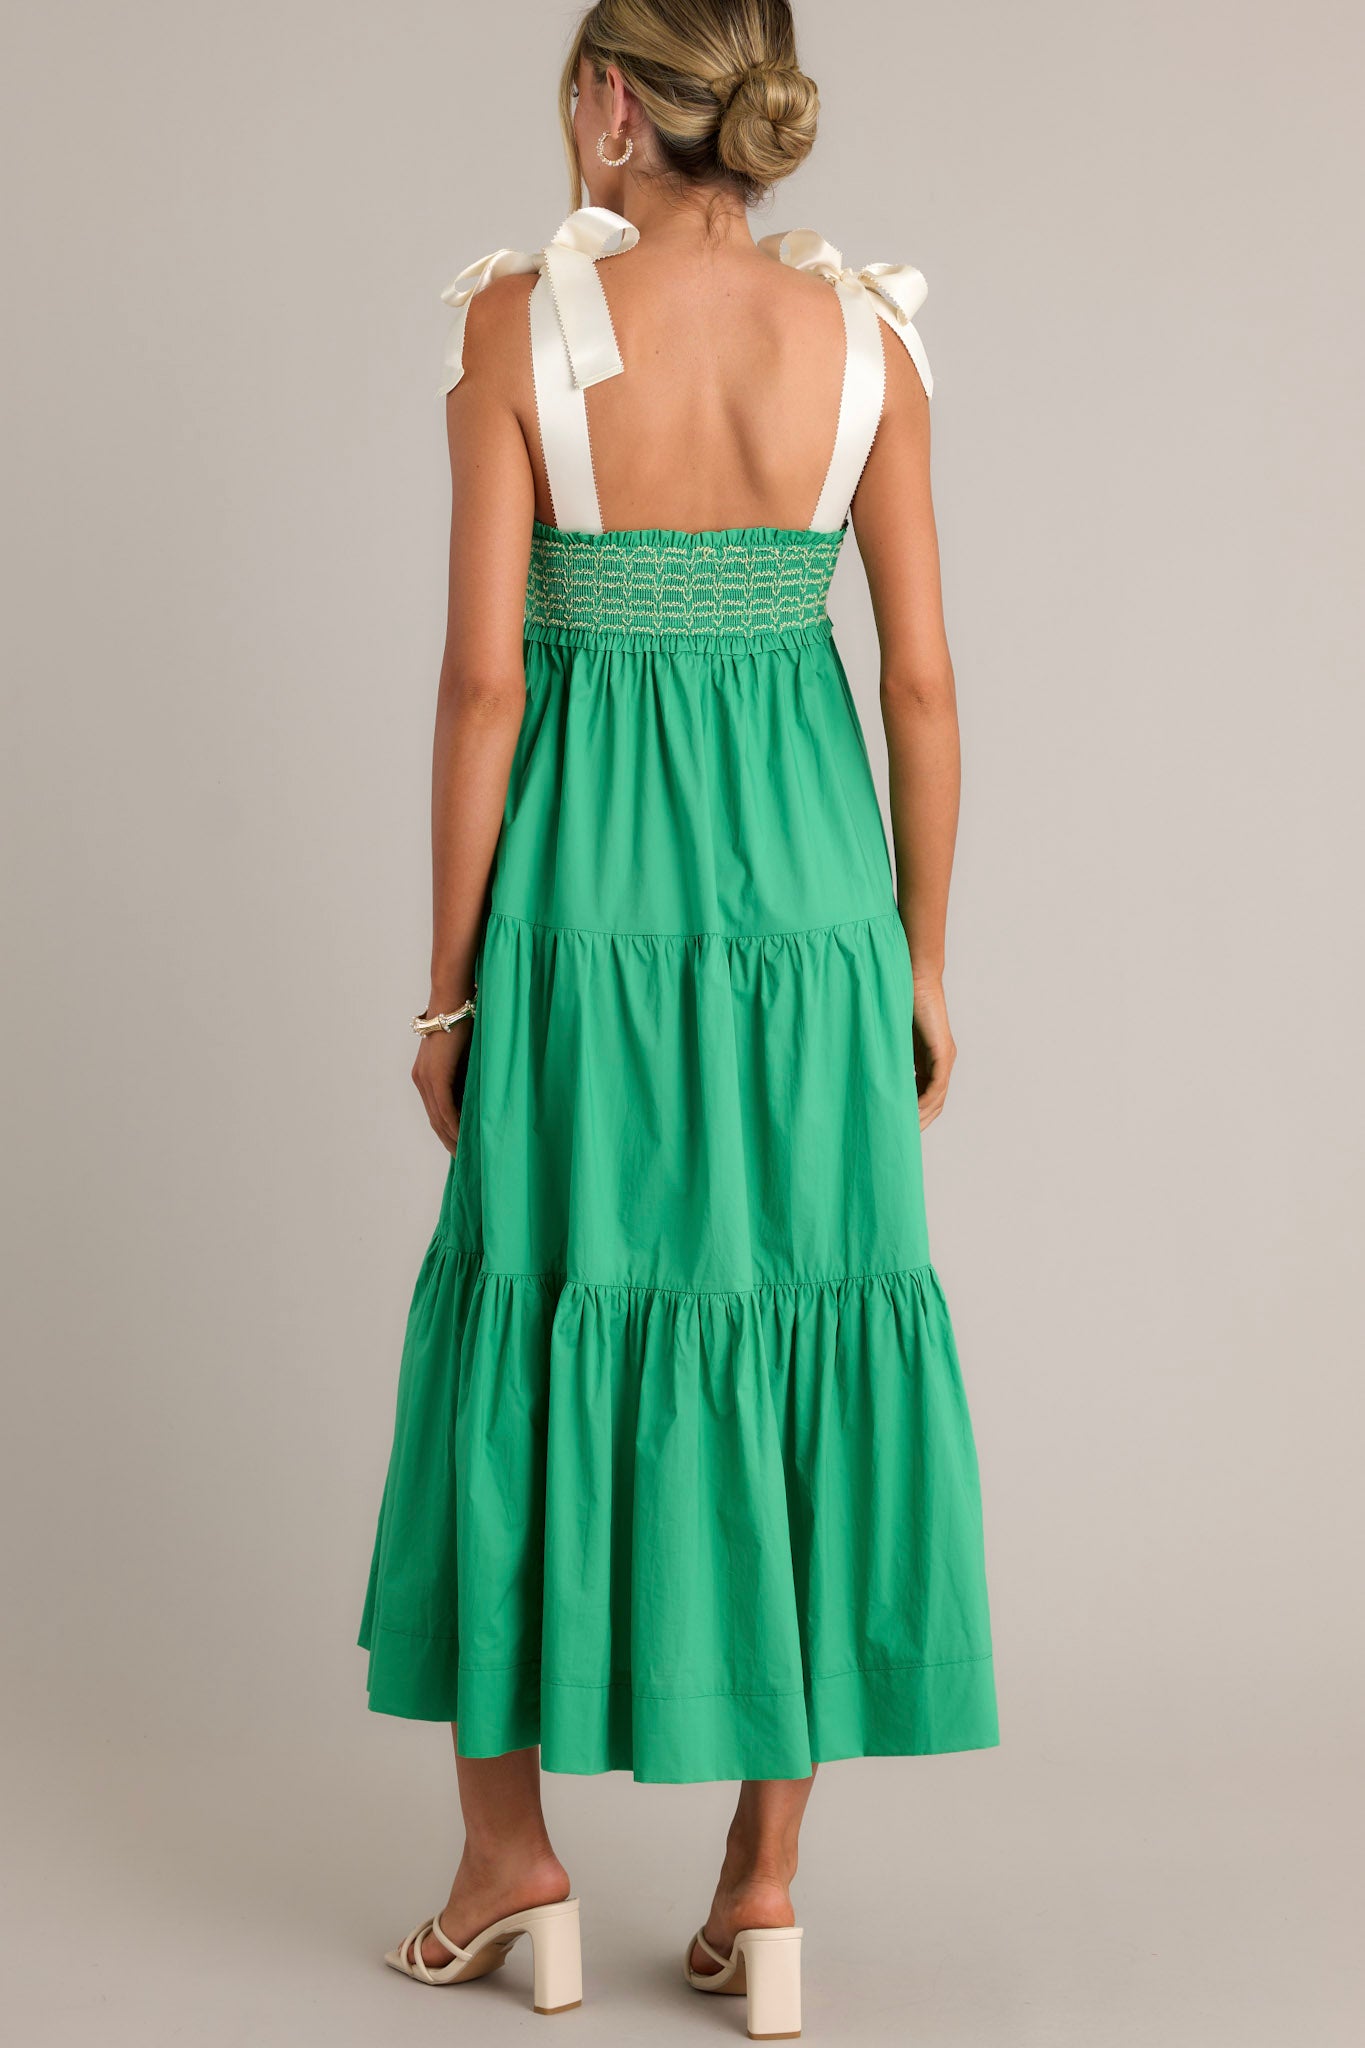 Back view of a green maxi dress highlighting the thick self-tie straps, fully smocked bodice, and overall fit.